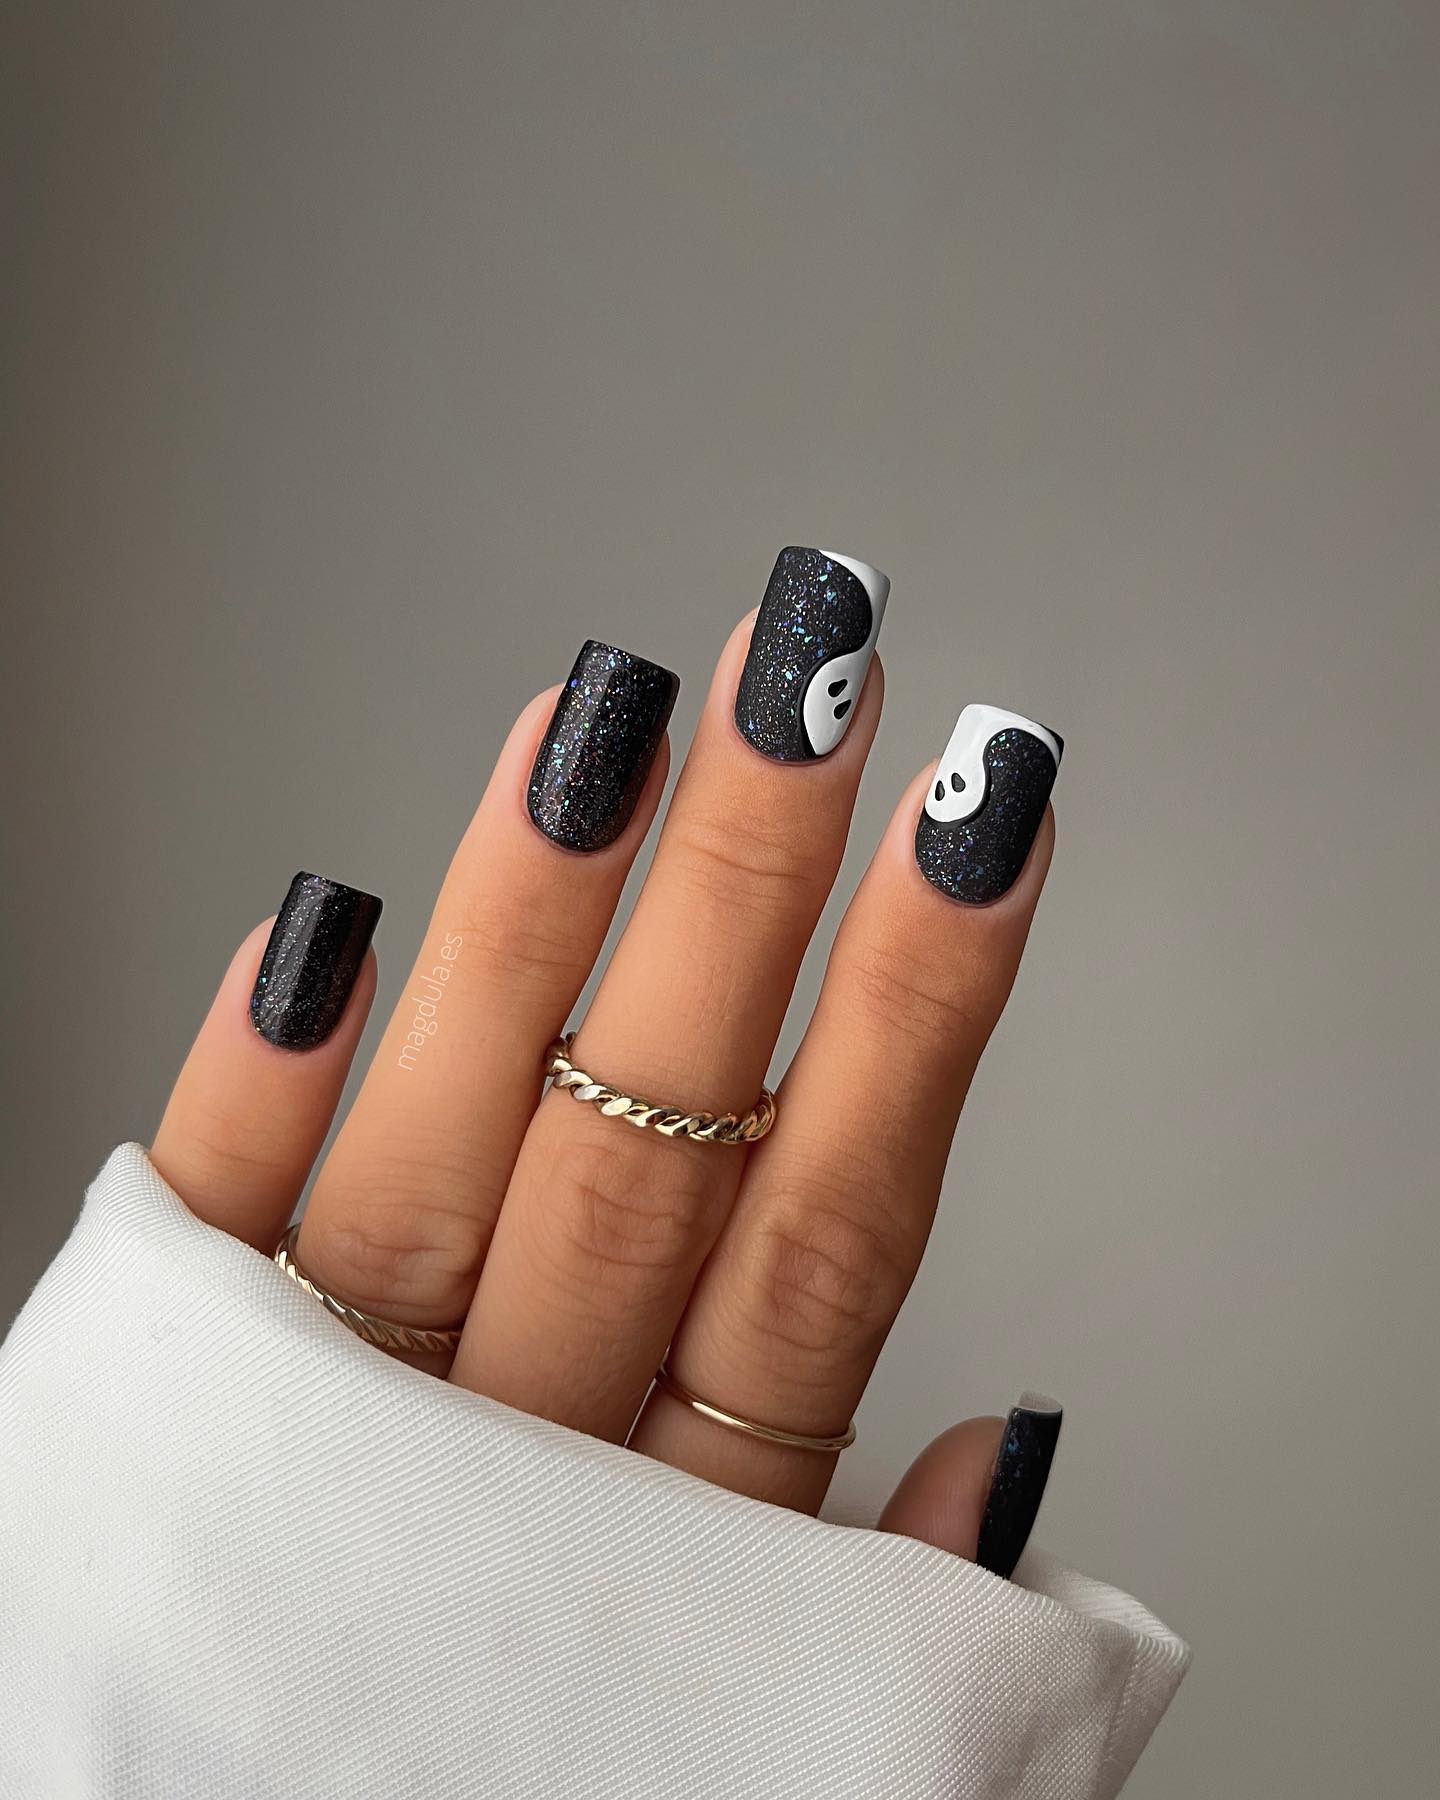 Ghost nail art is perfect for Halloween, isn't it? Generally ghosts are applied on shiny black nail polish but it is time for a change. Matte black looks quite nice but if you want to shine, you can add some glitters on it.